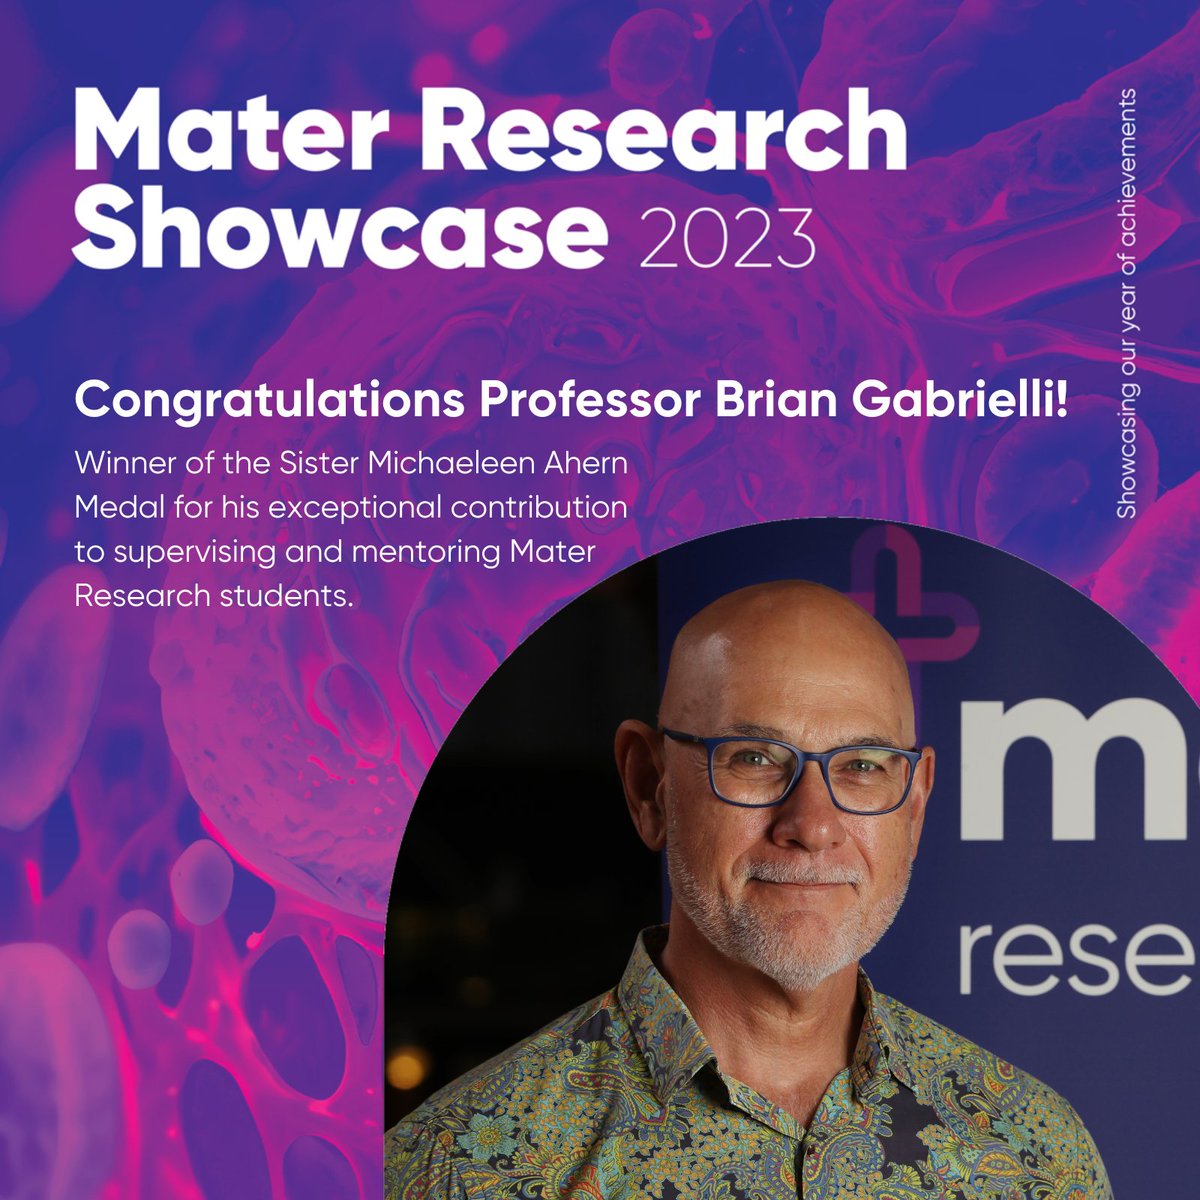 Congratulations to Professor Brian Gabrielli, winner of the Sister Michaeleen Mary Ahern Medal for an individual who has made an exceptional contribution to supervising and mentoring Mater Research students.